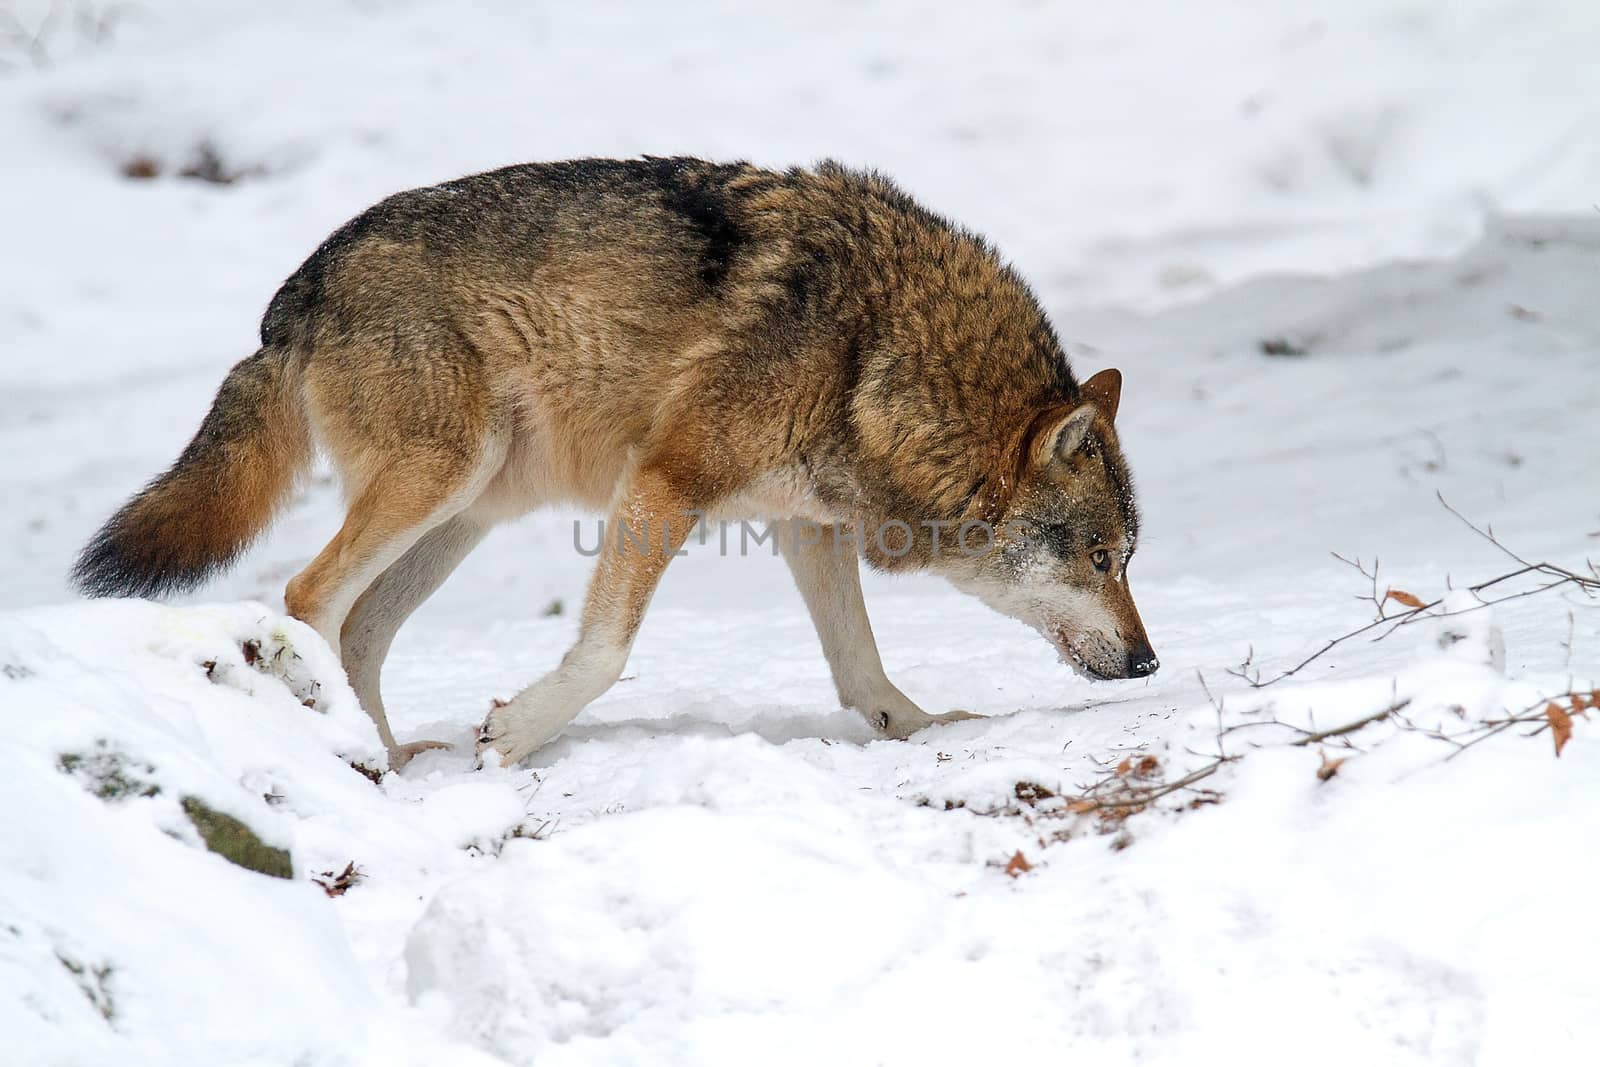 Gray wolf (Canis lupus) walking on the snow by Simon02